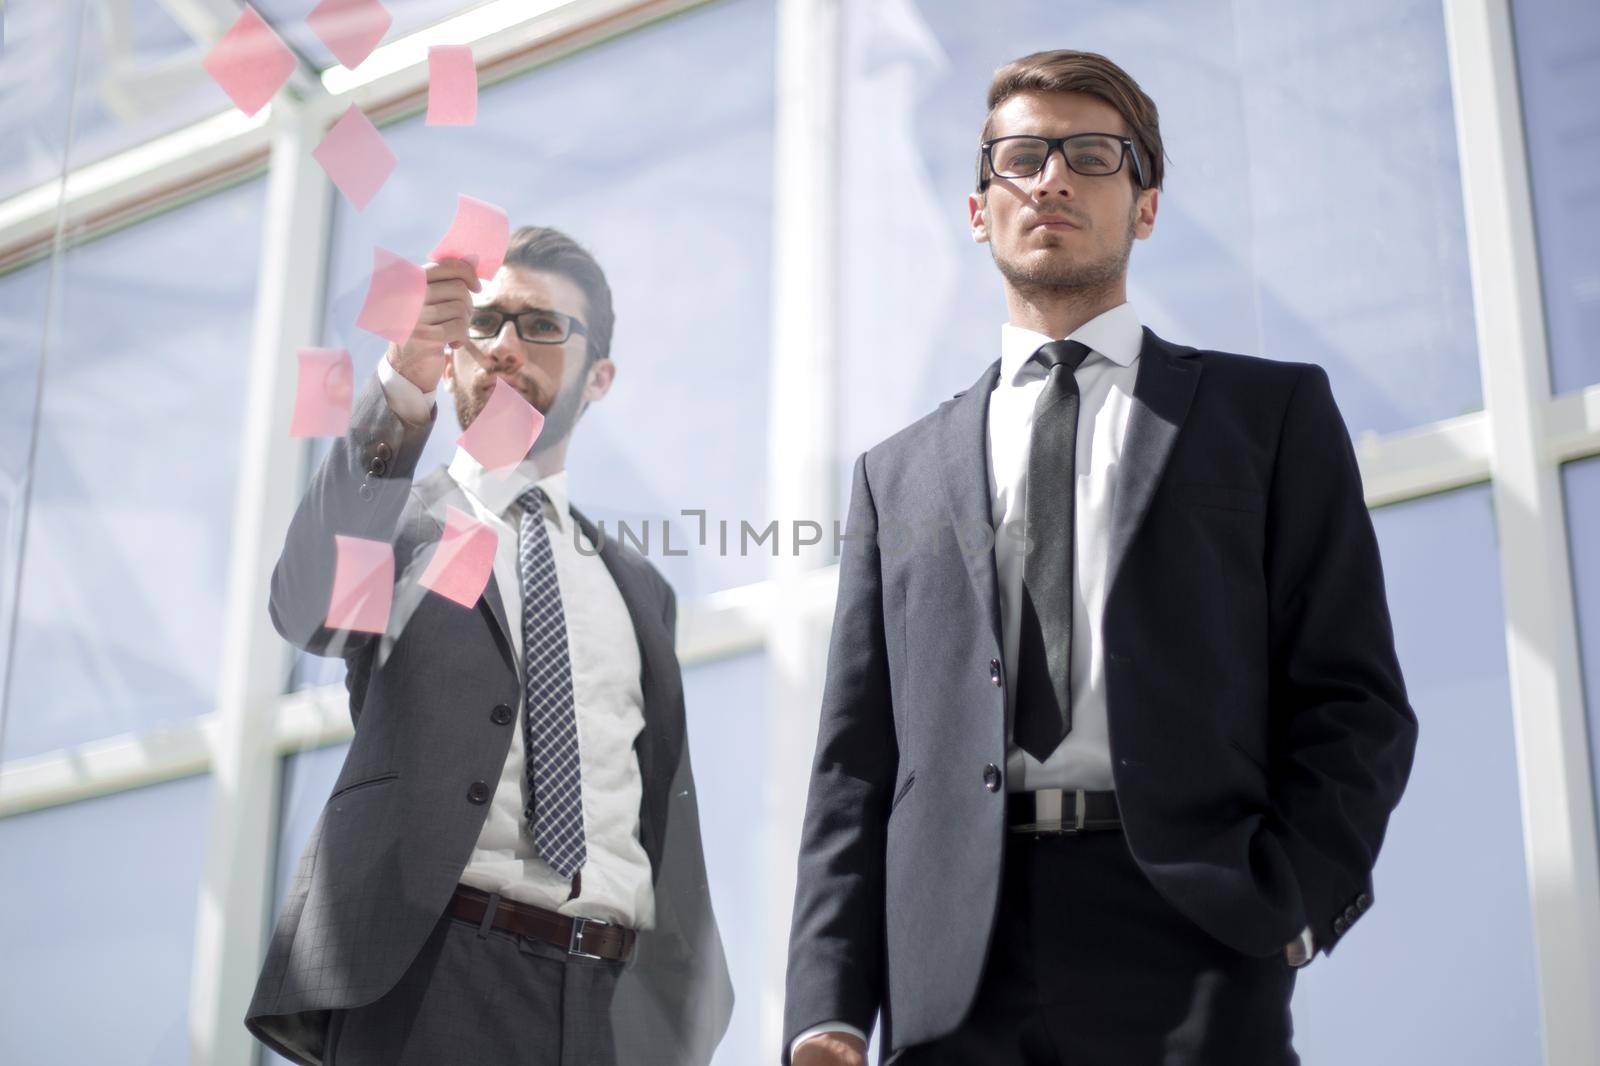 Business colleagues read stickers pasted on a transparent glass wall. by asdf